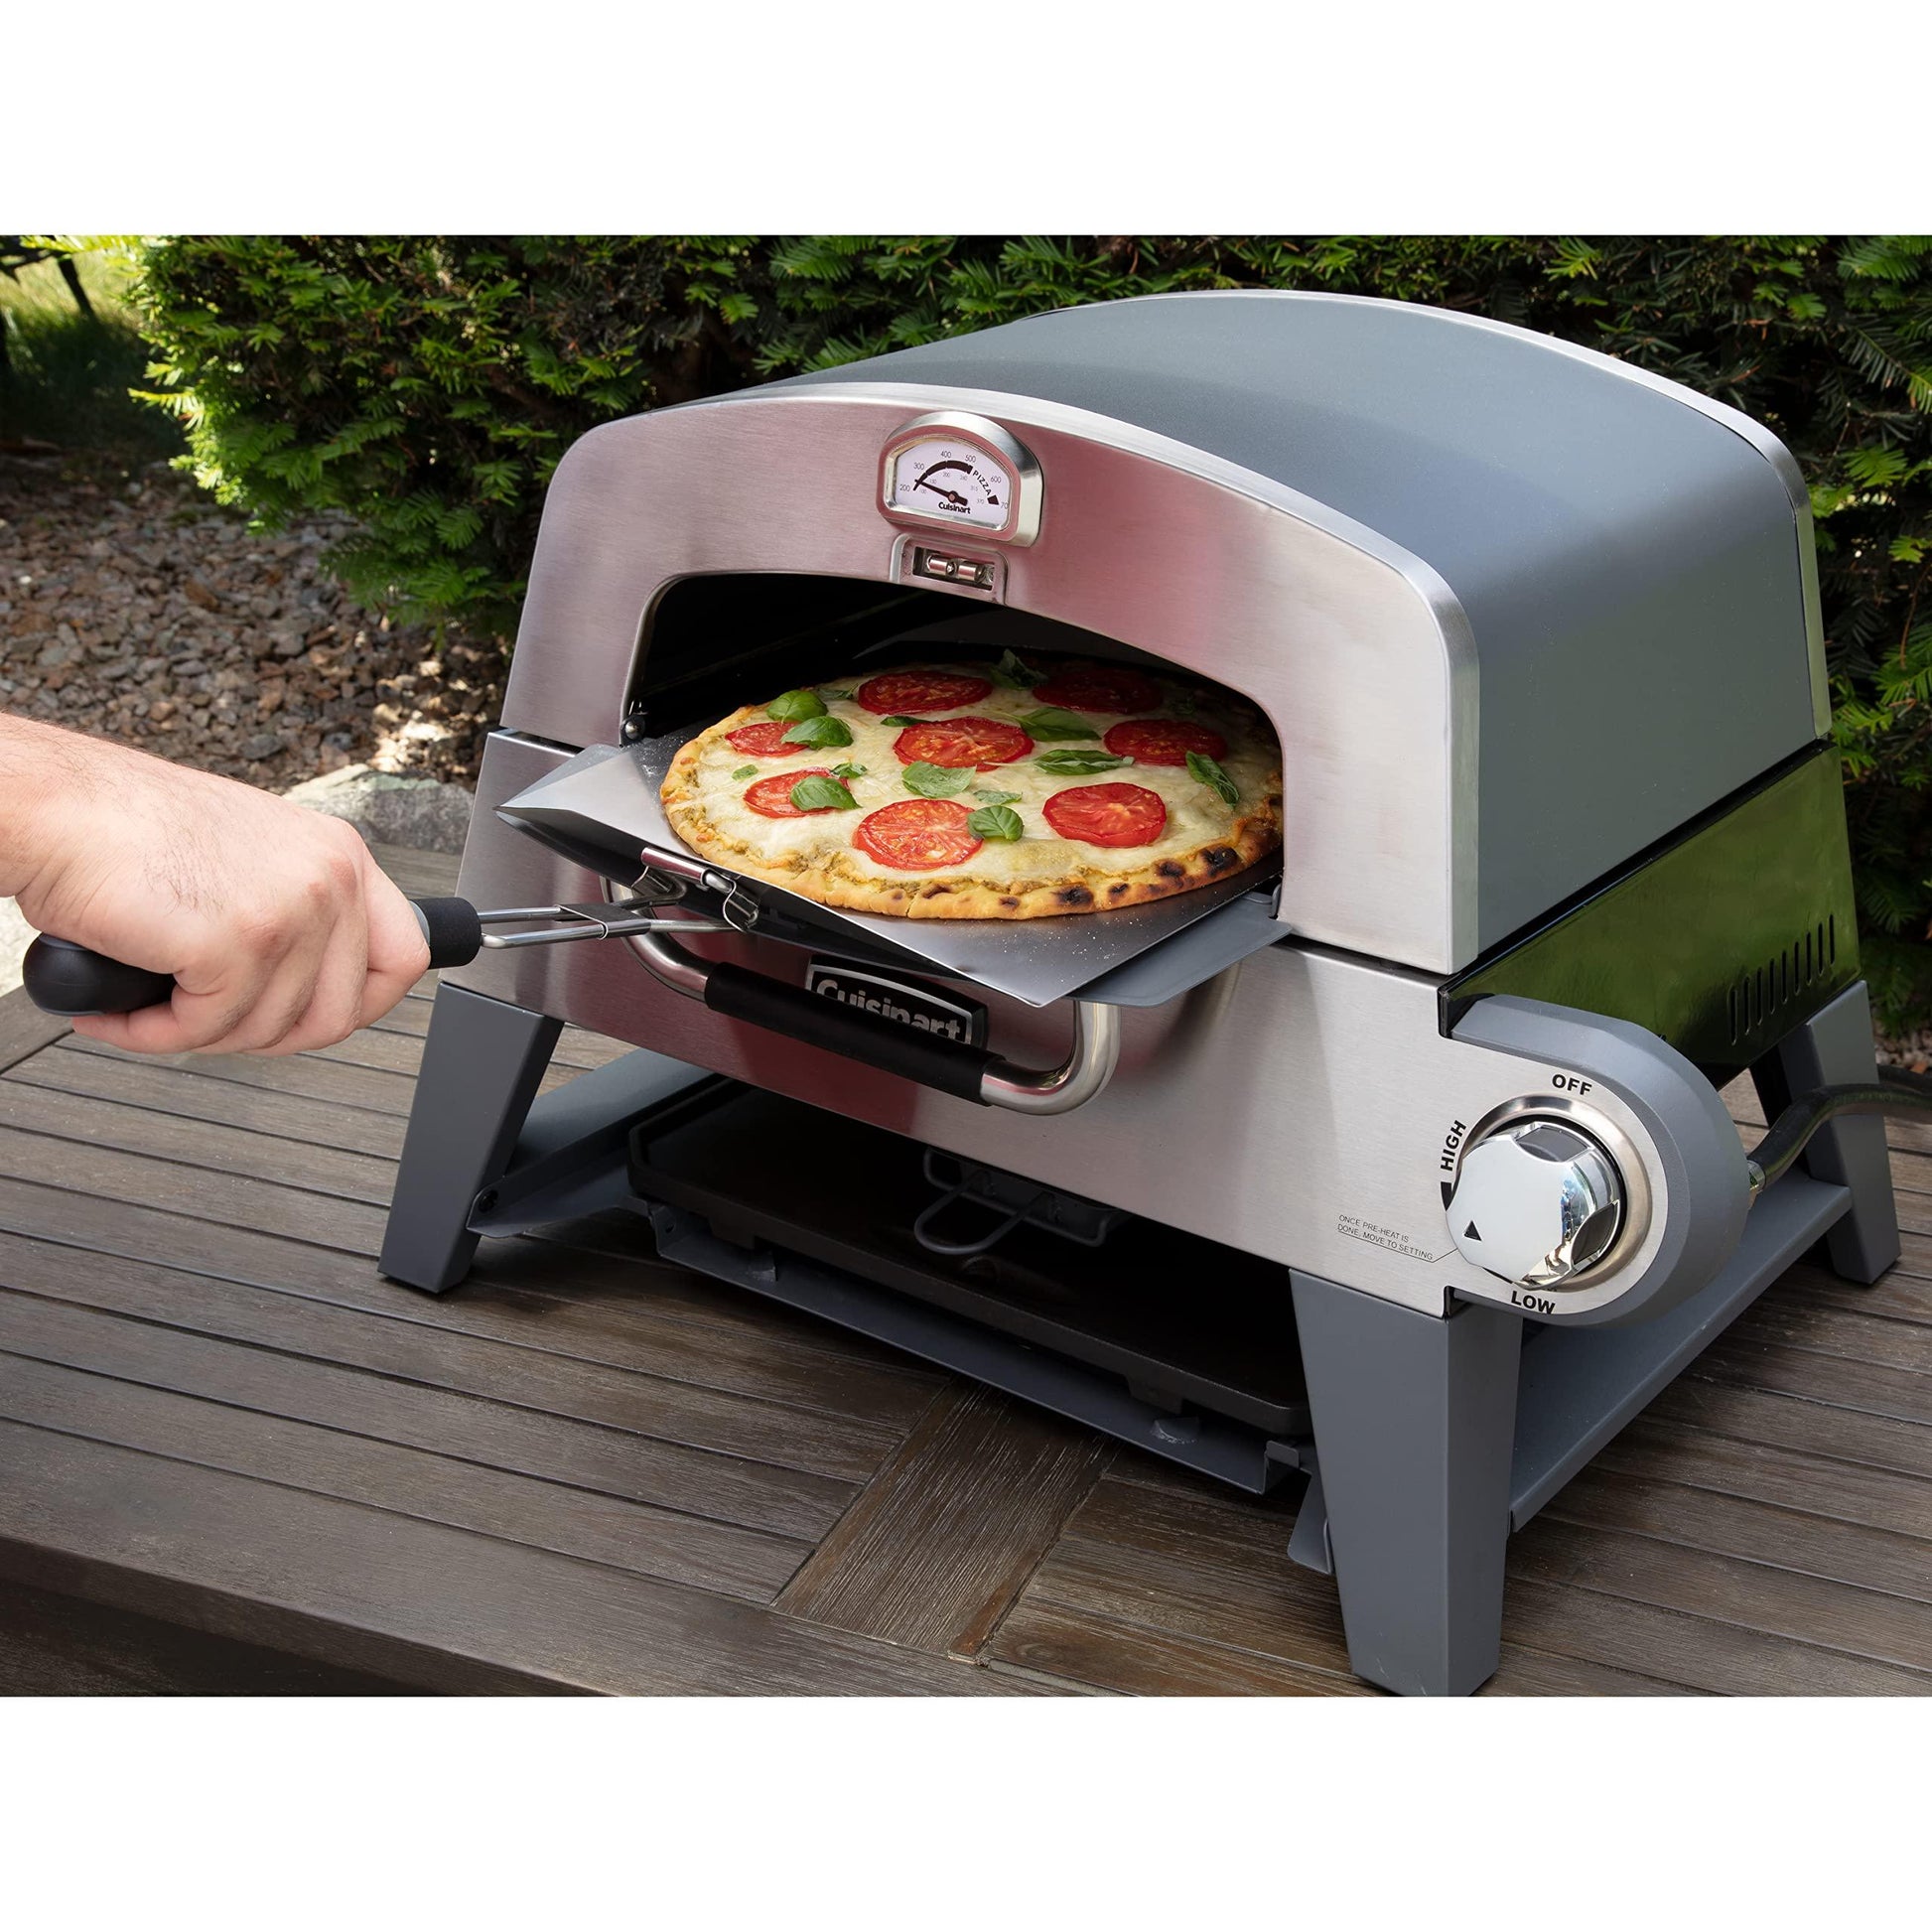 Cuisinart CGG-403 3-in-1 Pizza Oven Plus, Griddle, and Grill - CookCave